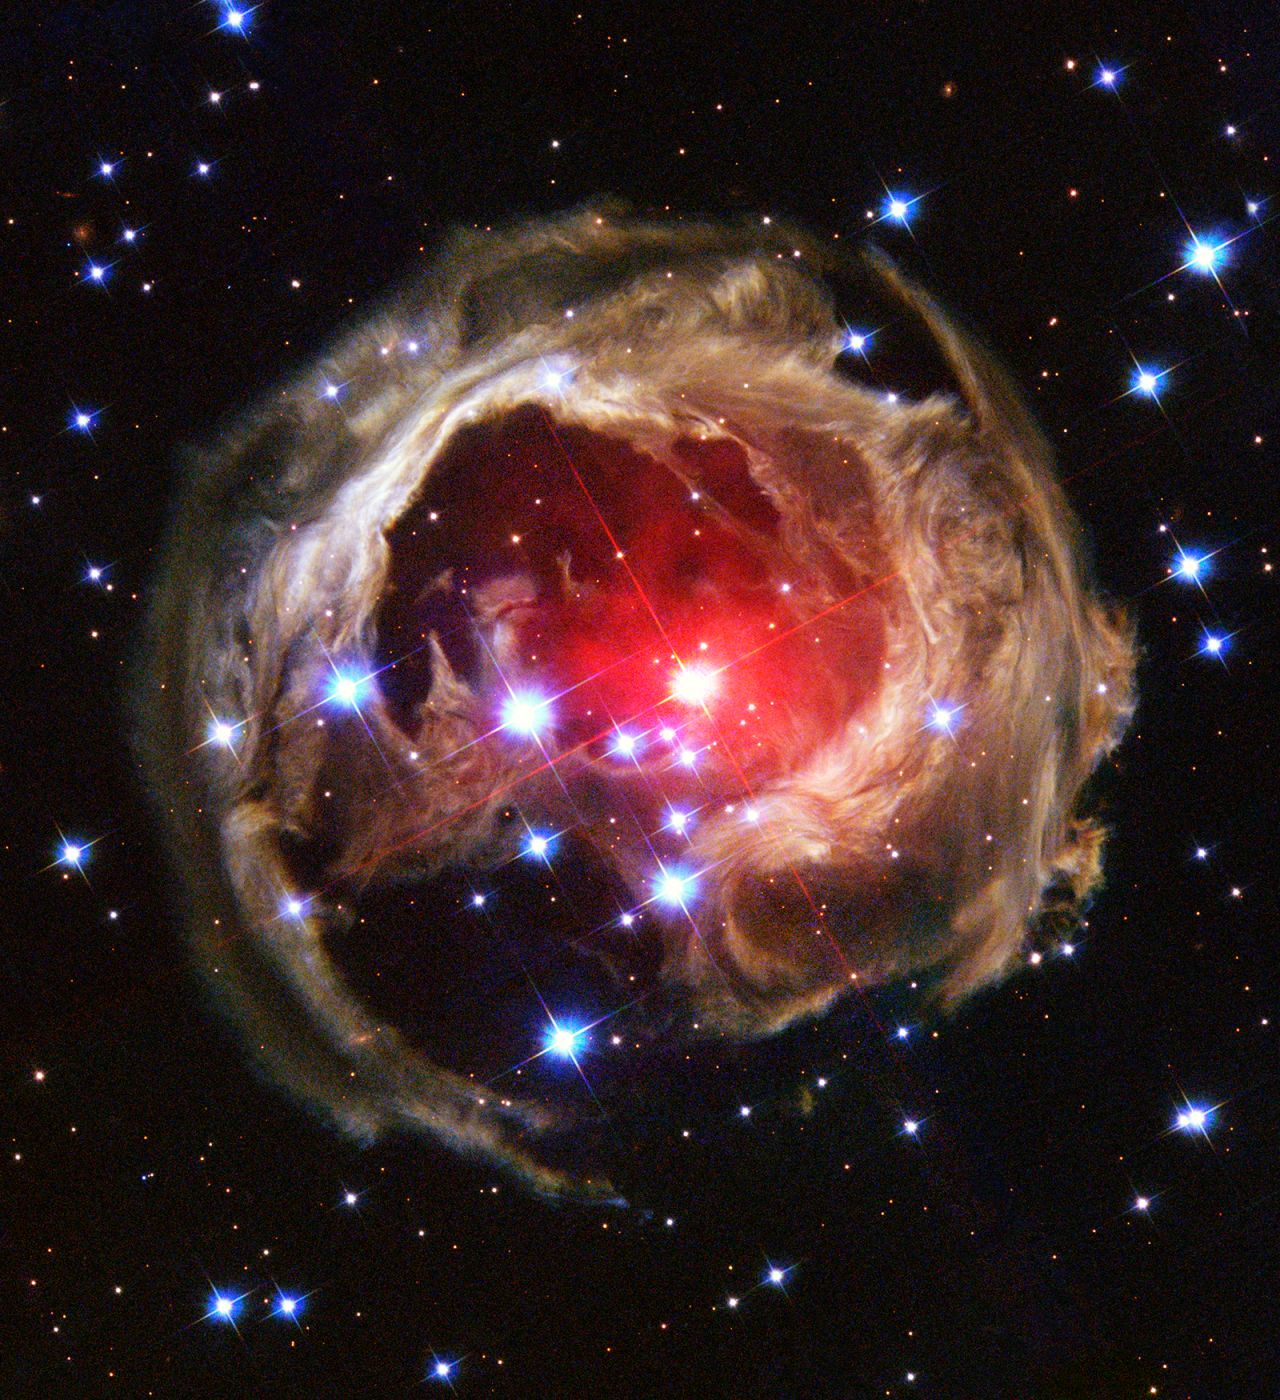 Hubble captured this view of an expanding light halo around the star V838 Monocerotis in 2004. 